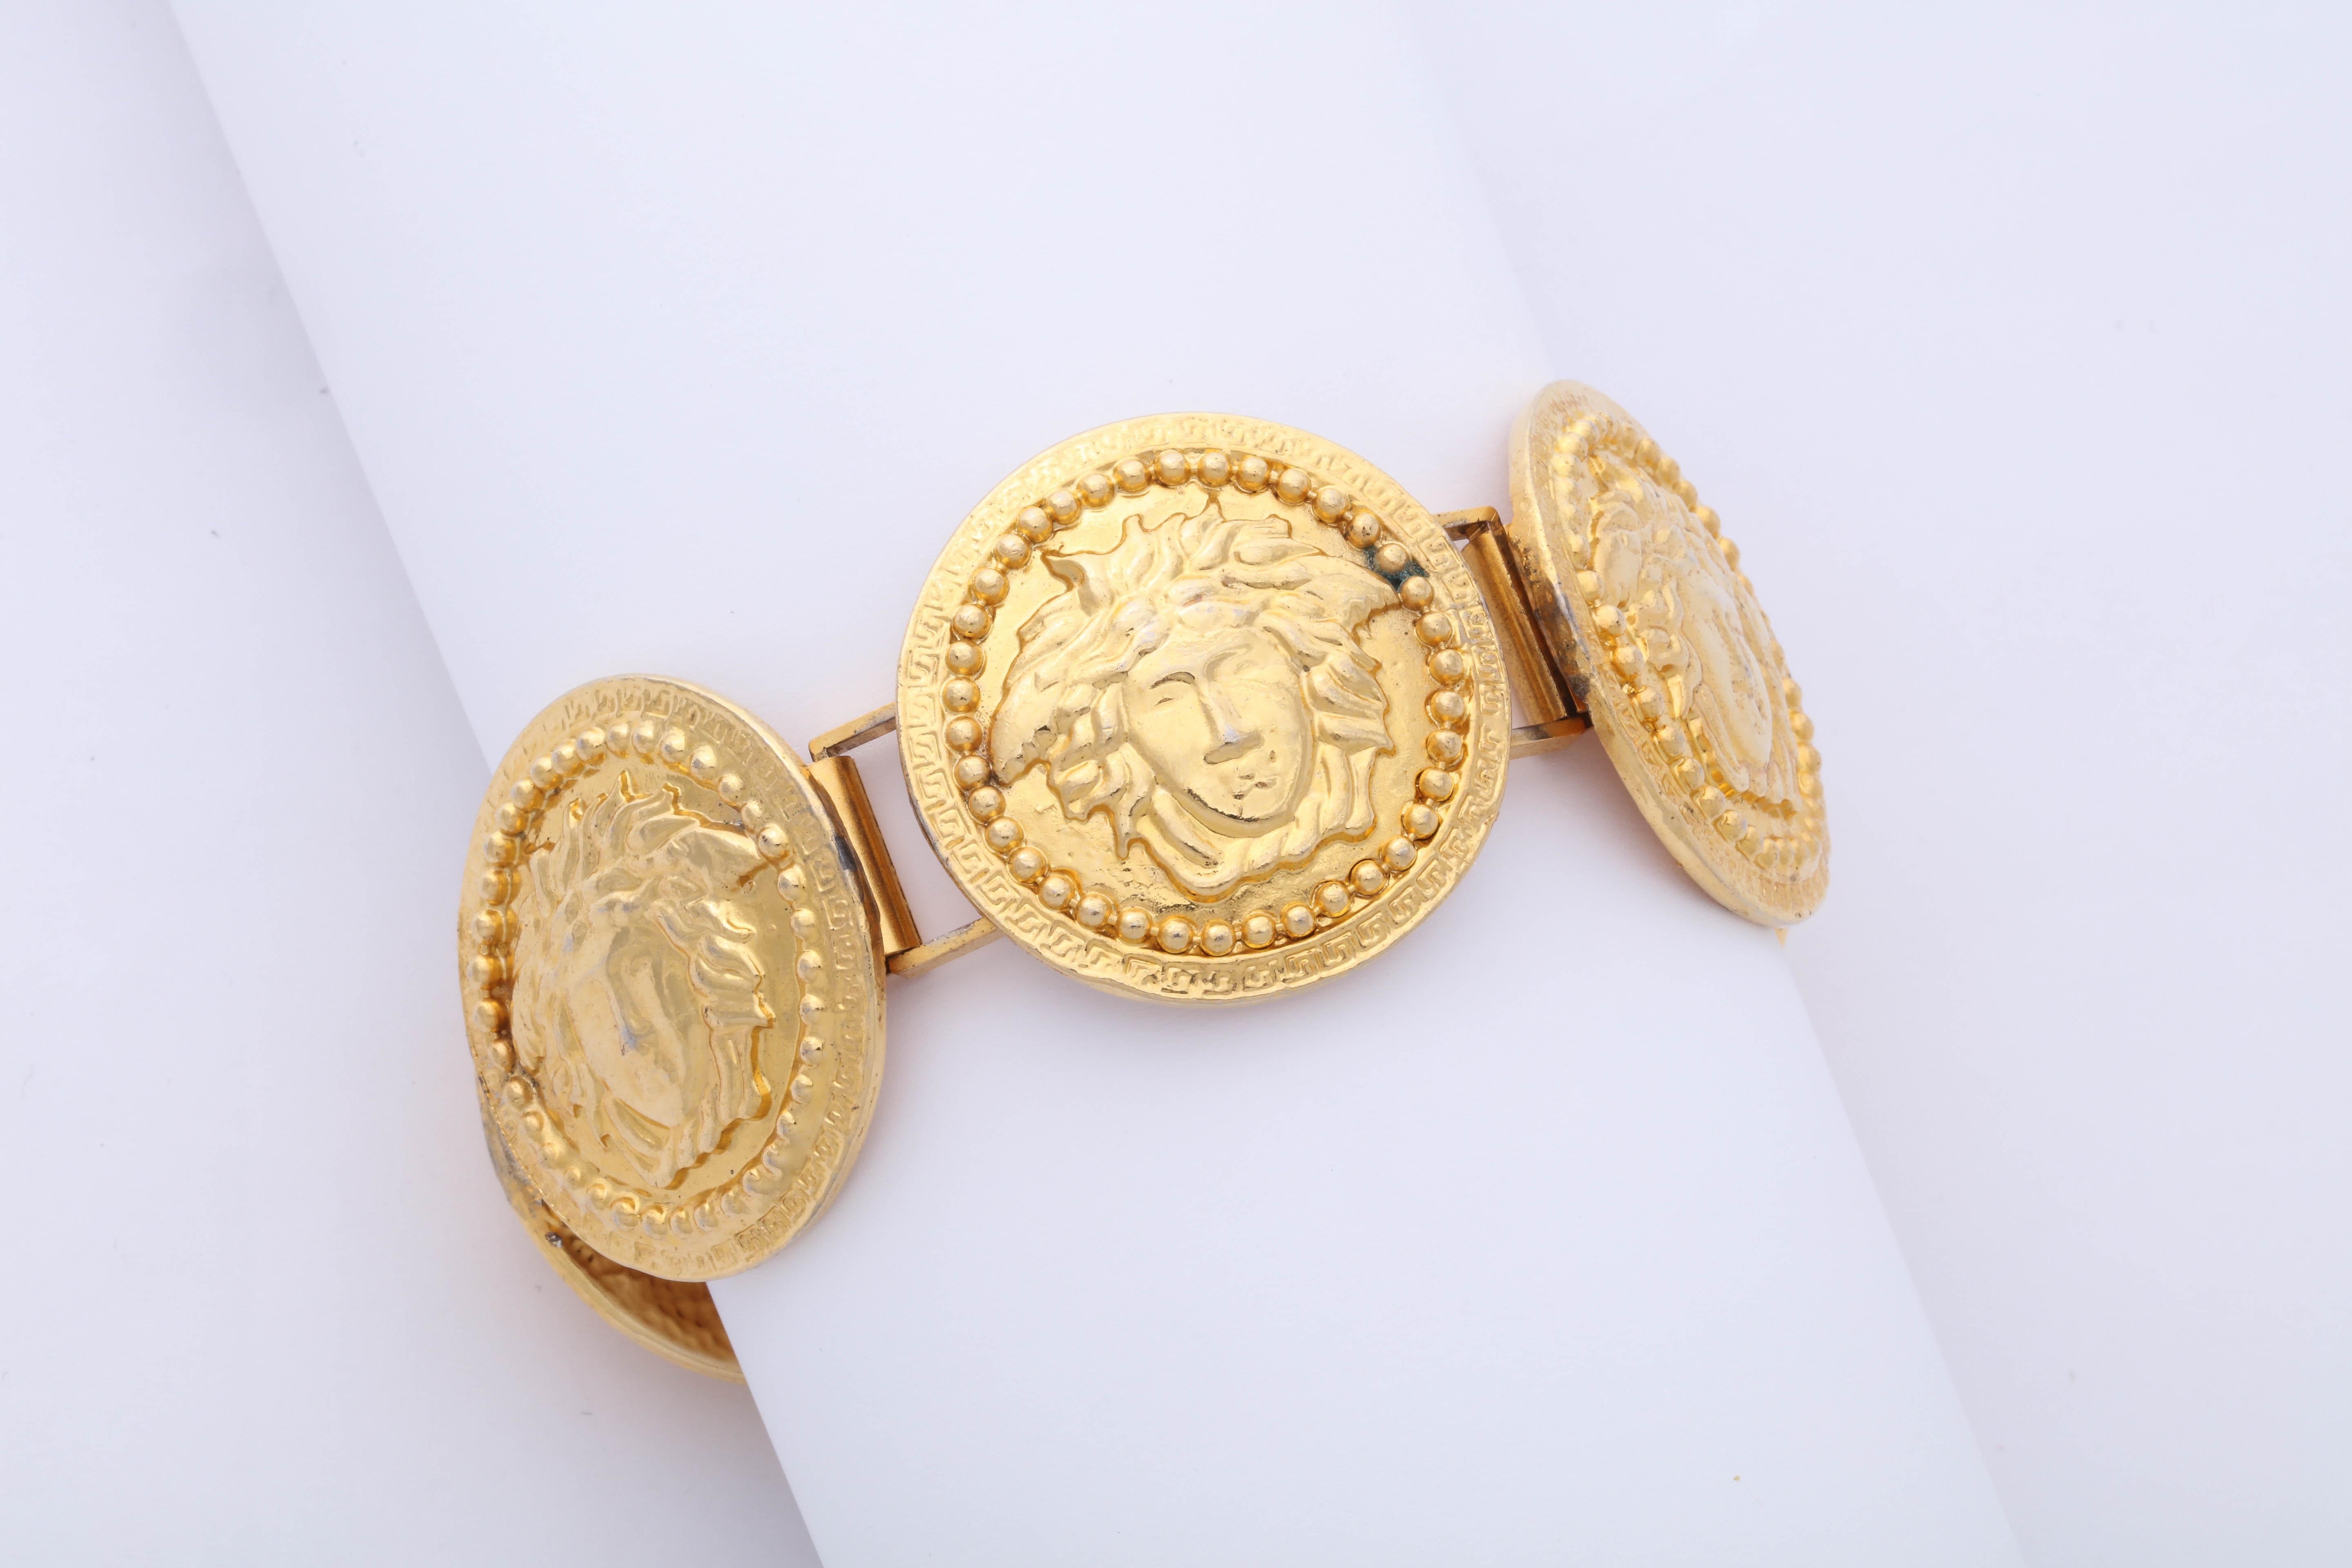 Gianni Versace Massive Gold Toned Bracelet With 5 Medusas In Good Condition For Sale In Chicago, IL